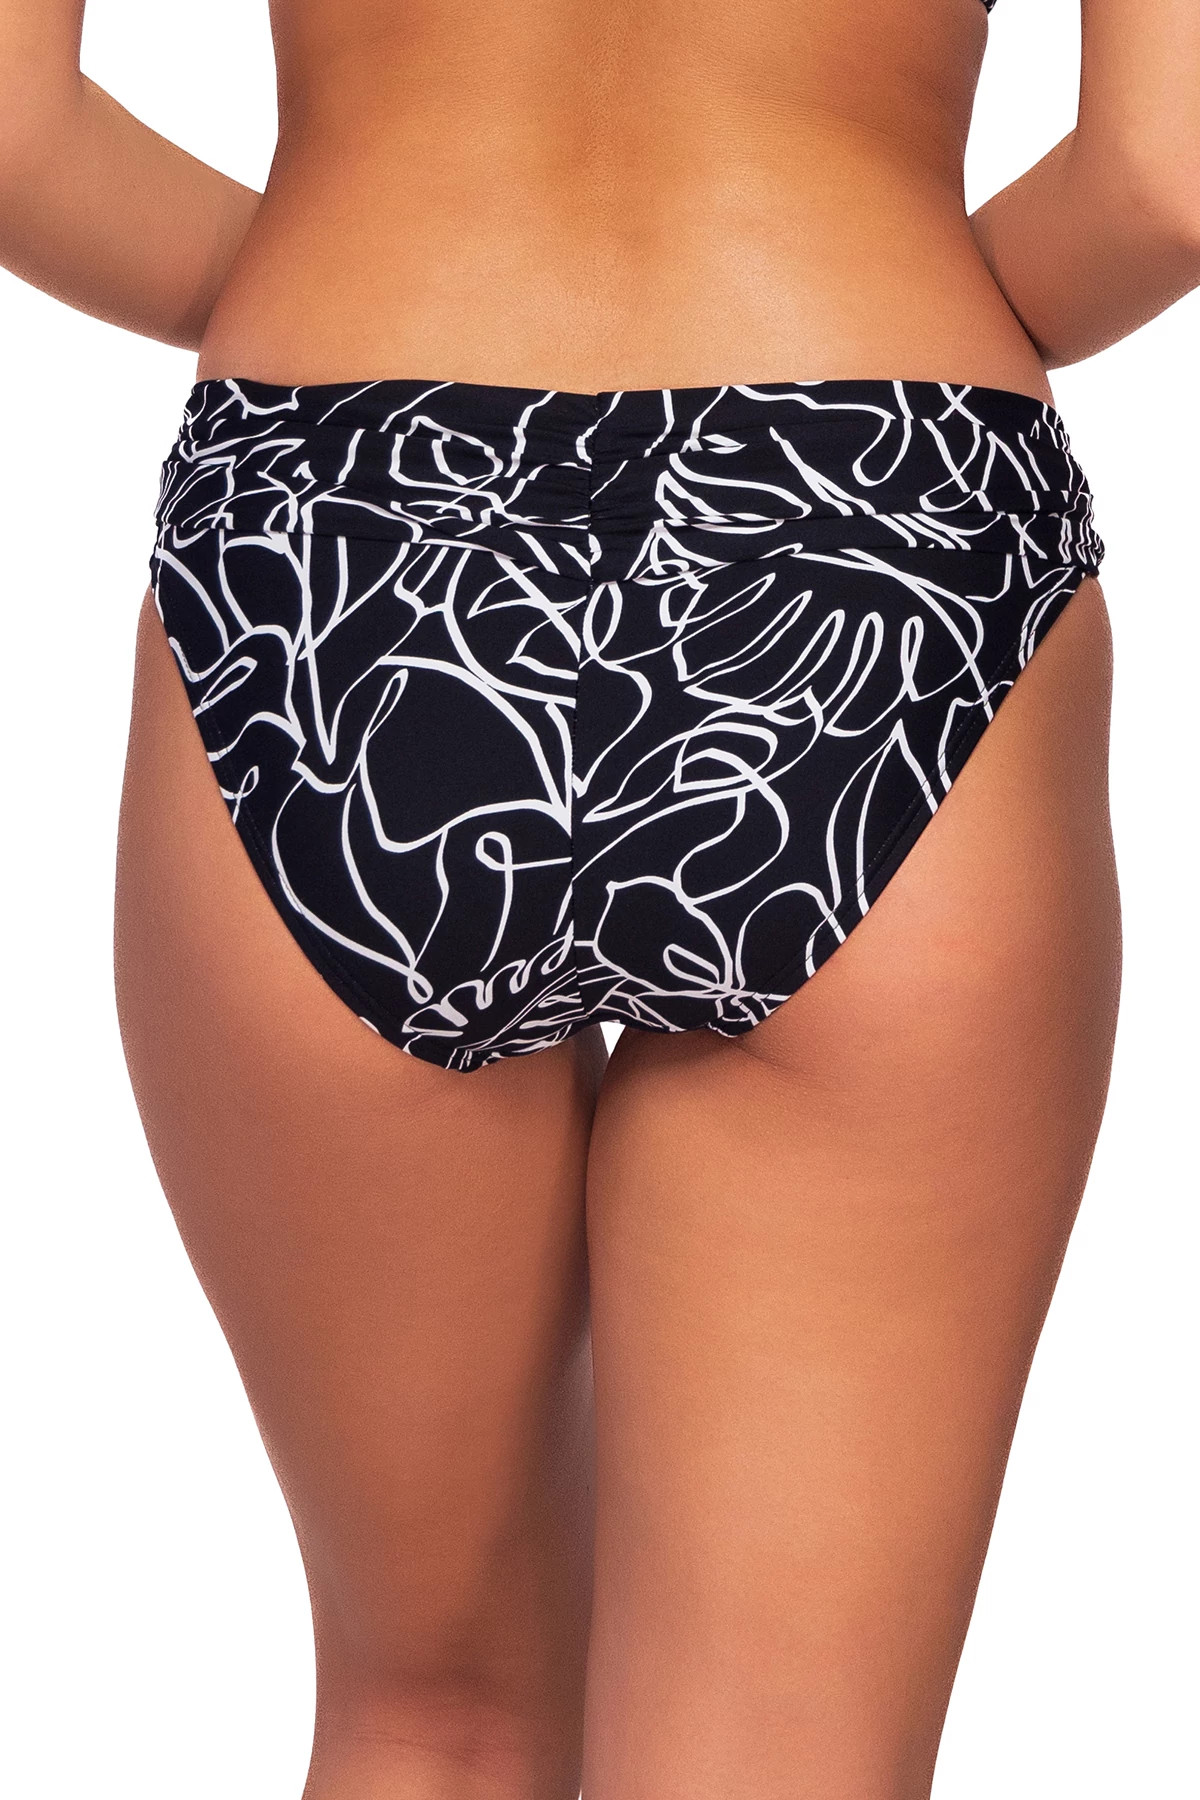 LOST PALMS Unforgettable Banded Hipster Bikini Bottom image number 2